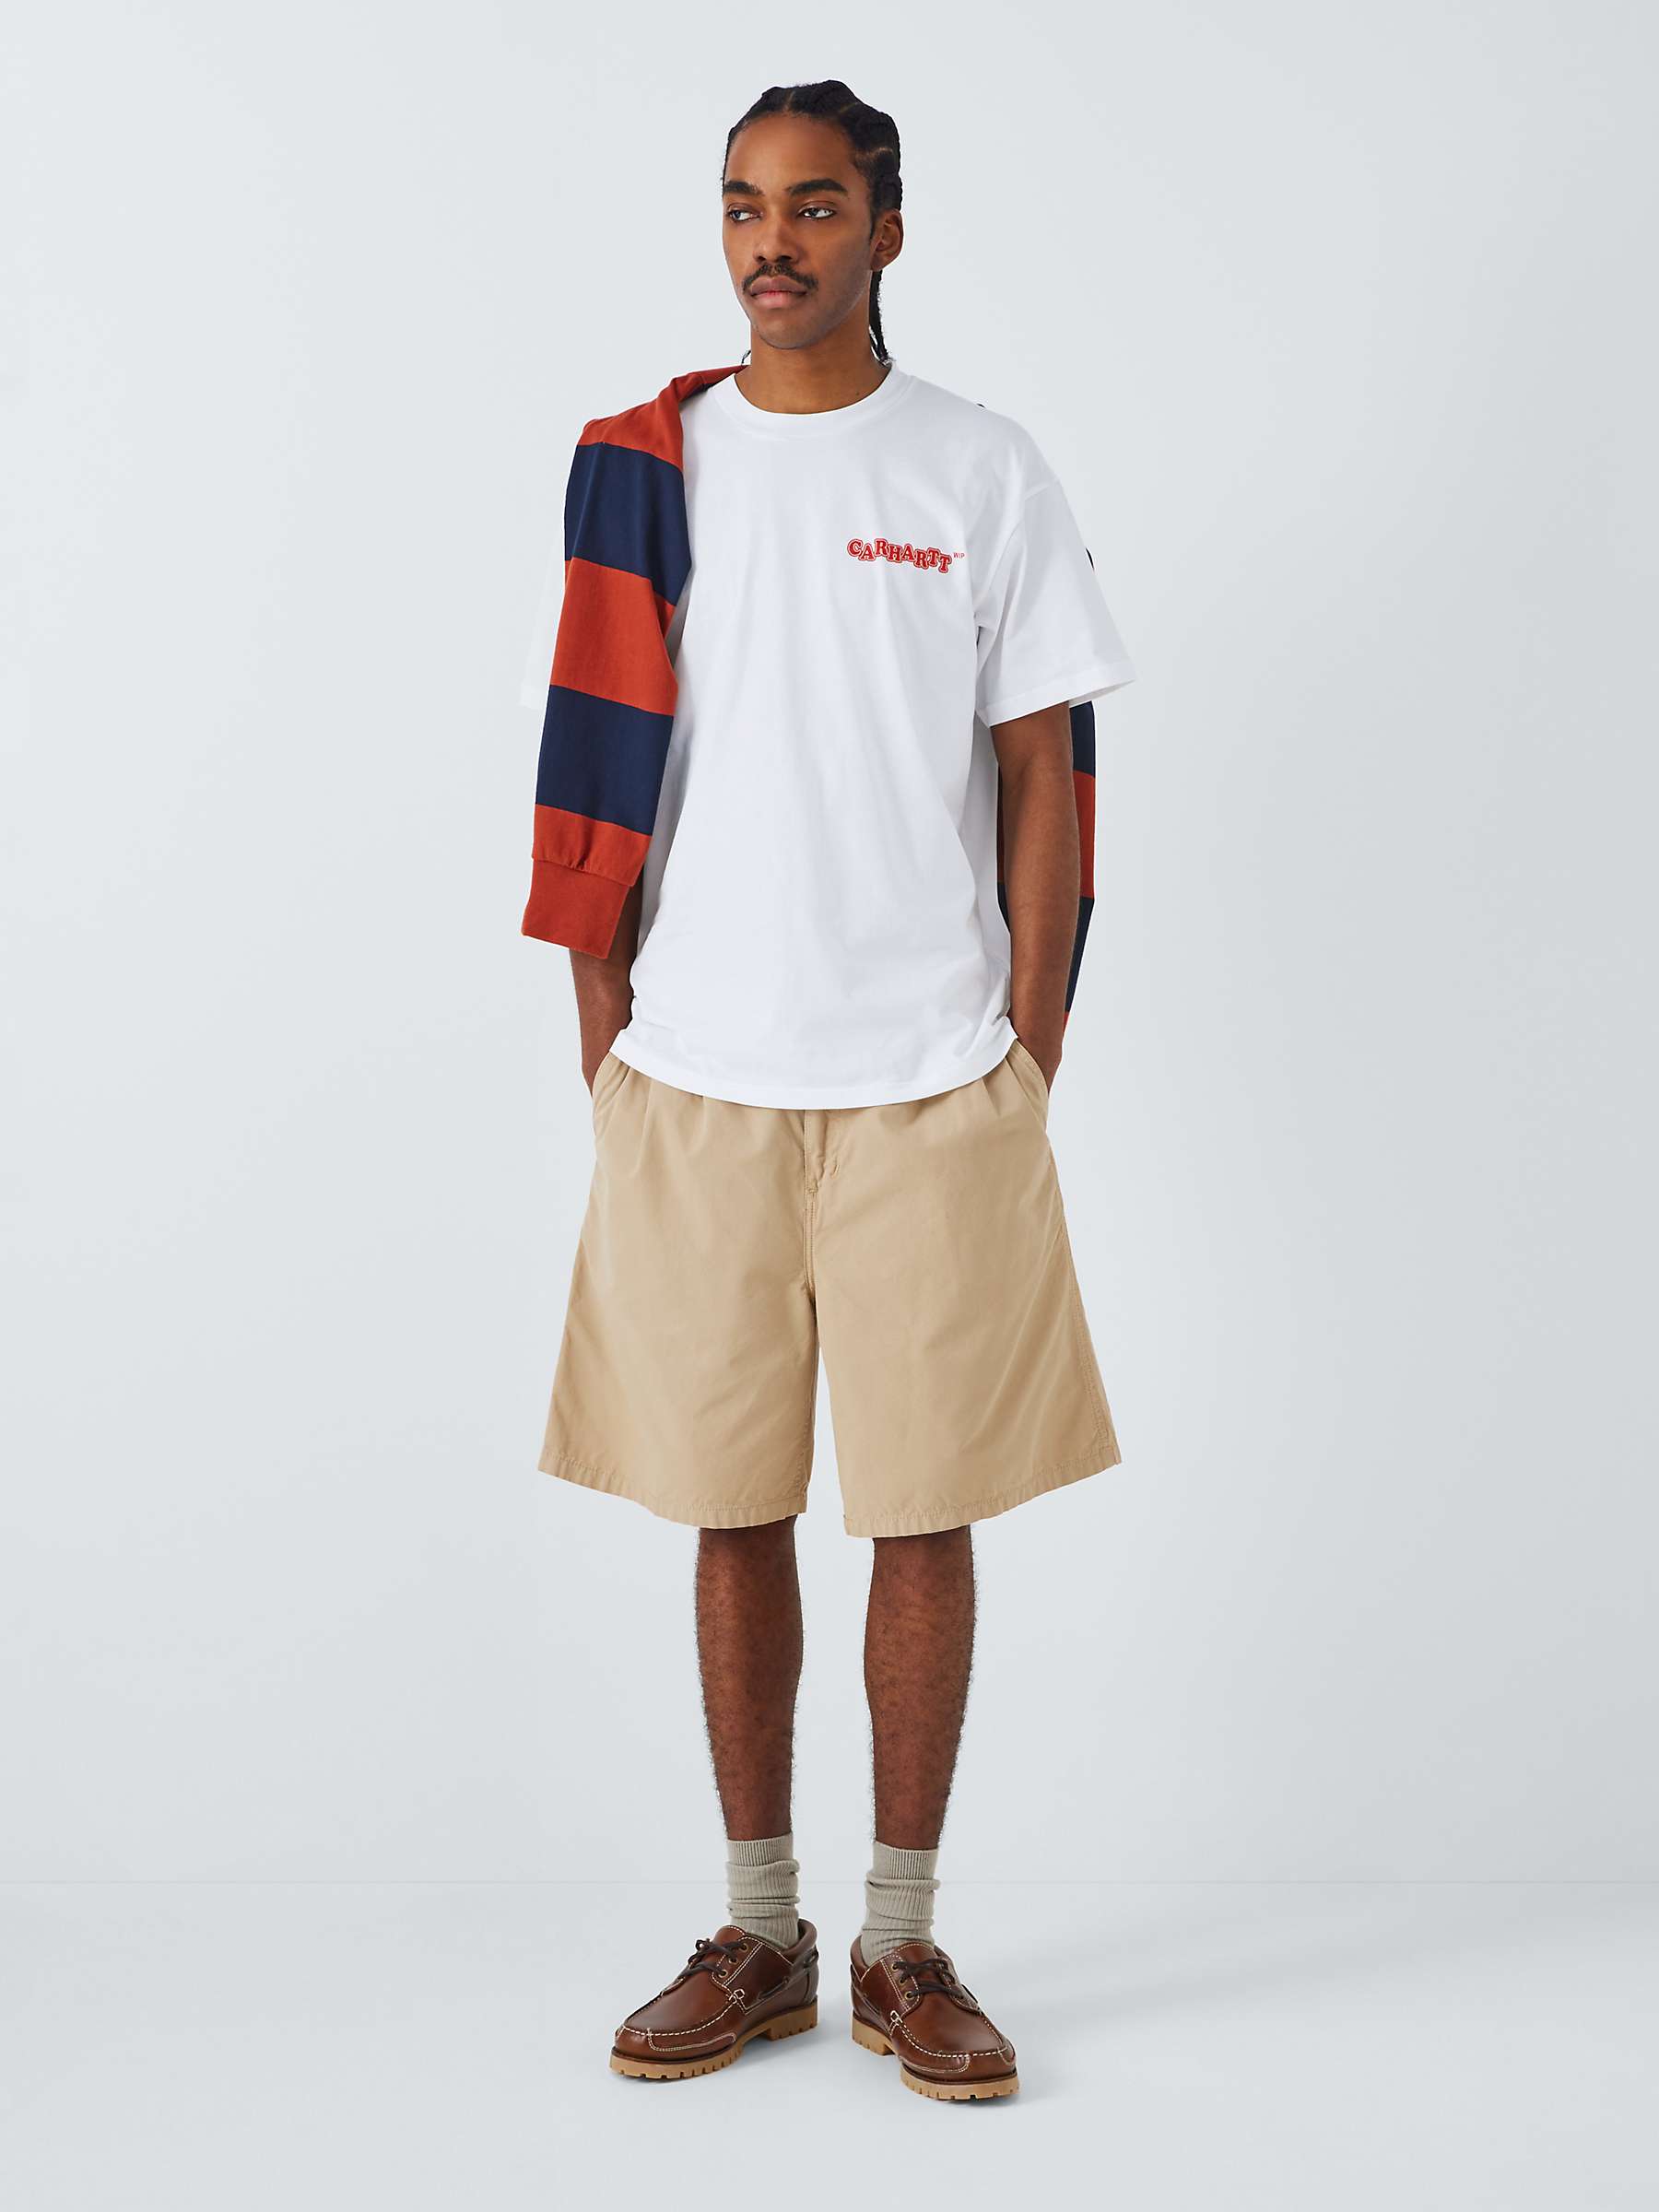 Buy Carhartt WIP Short Sleeve Fast Food T-Shirt, White/Red Online at johnlewis.com